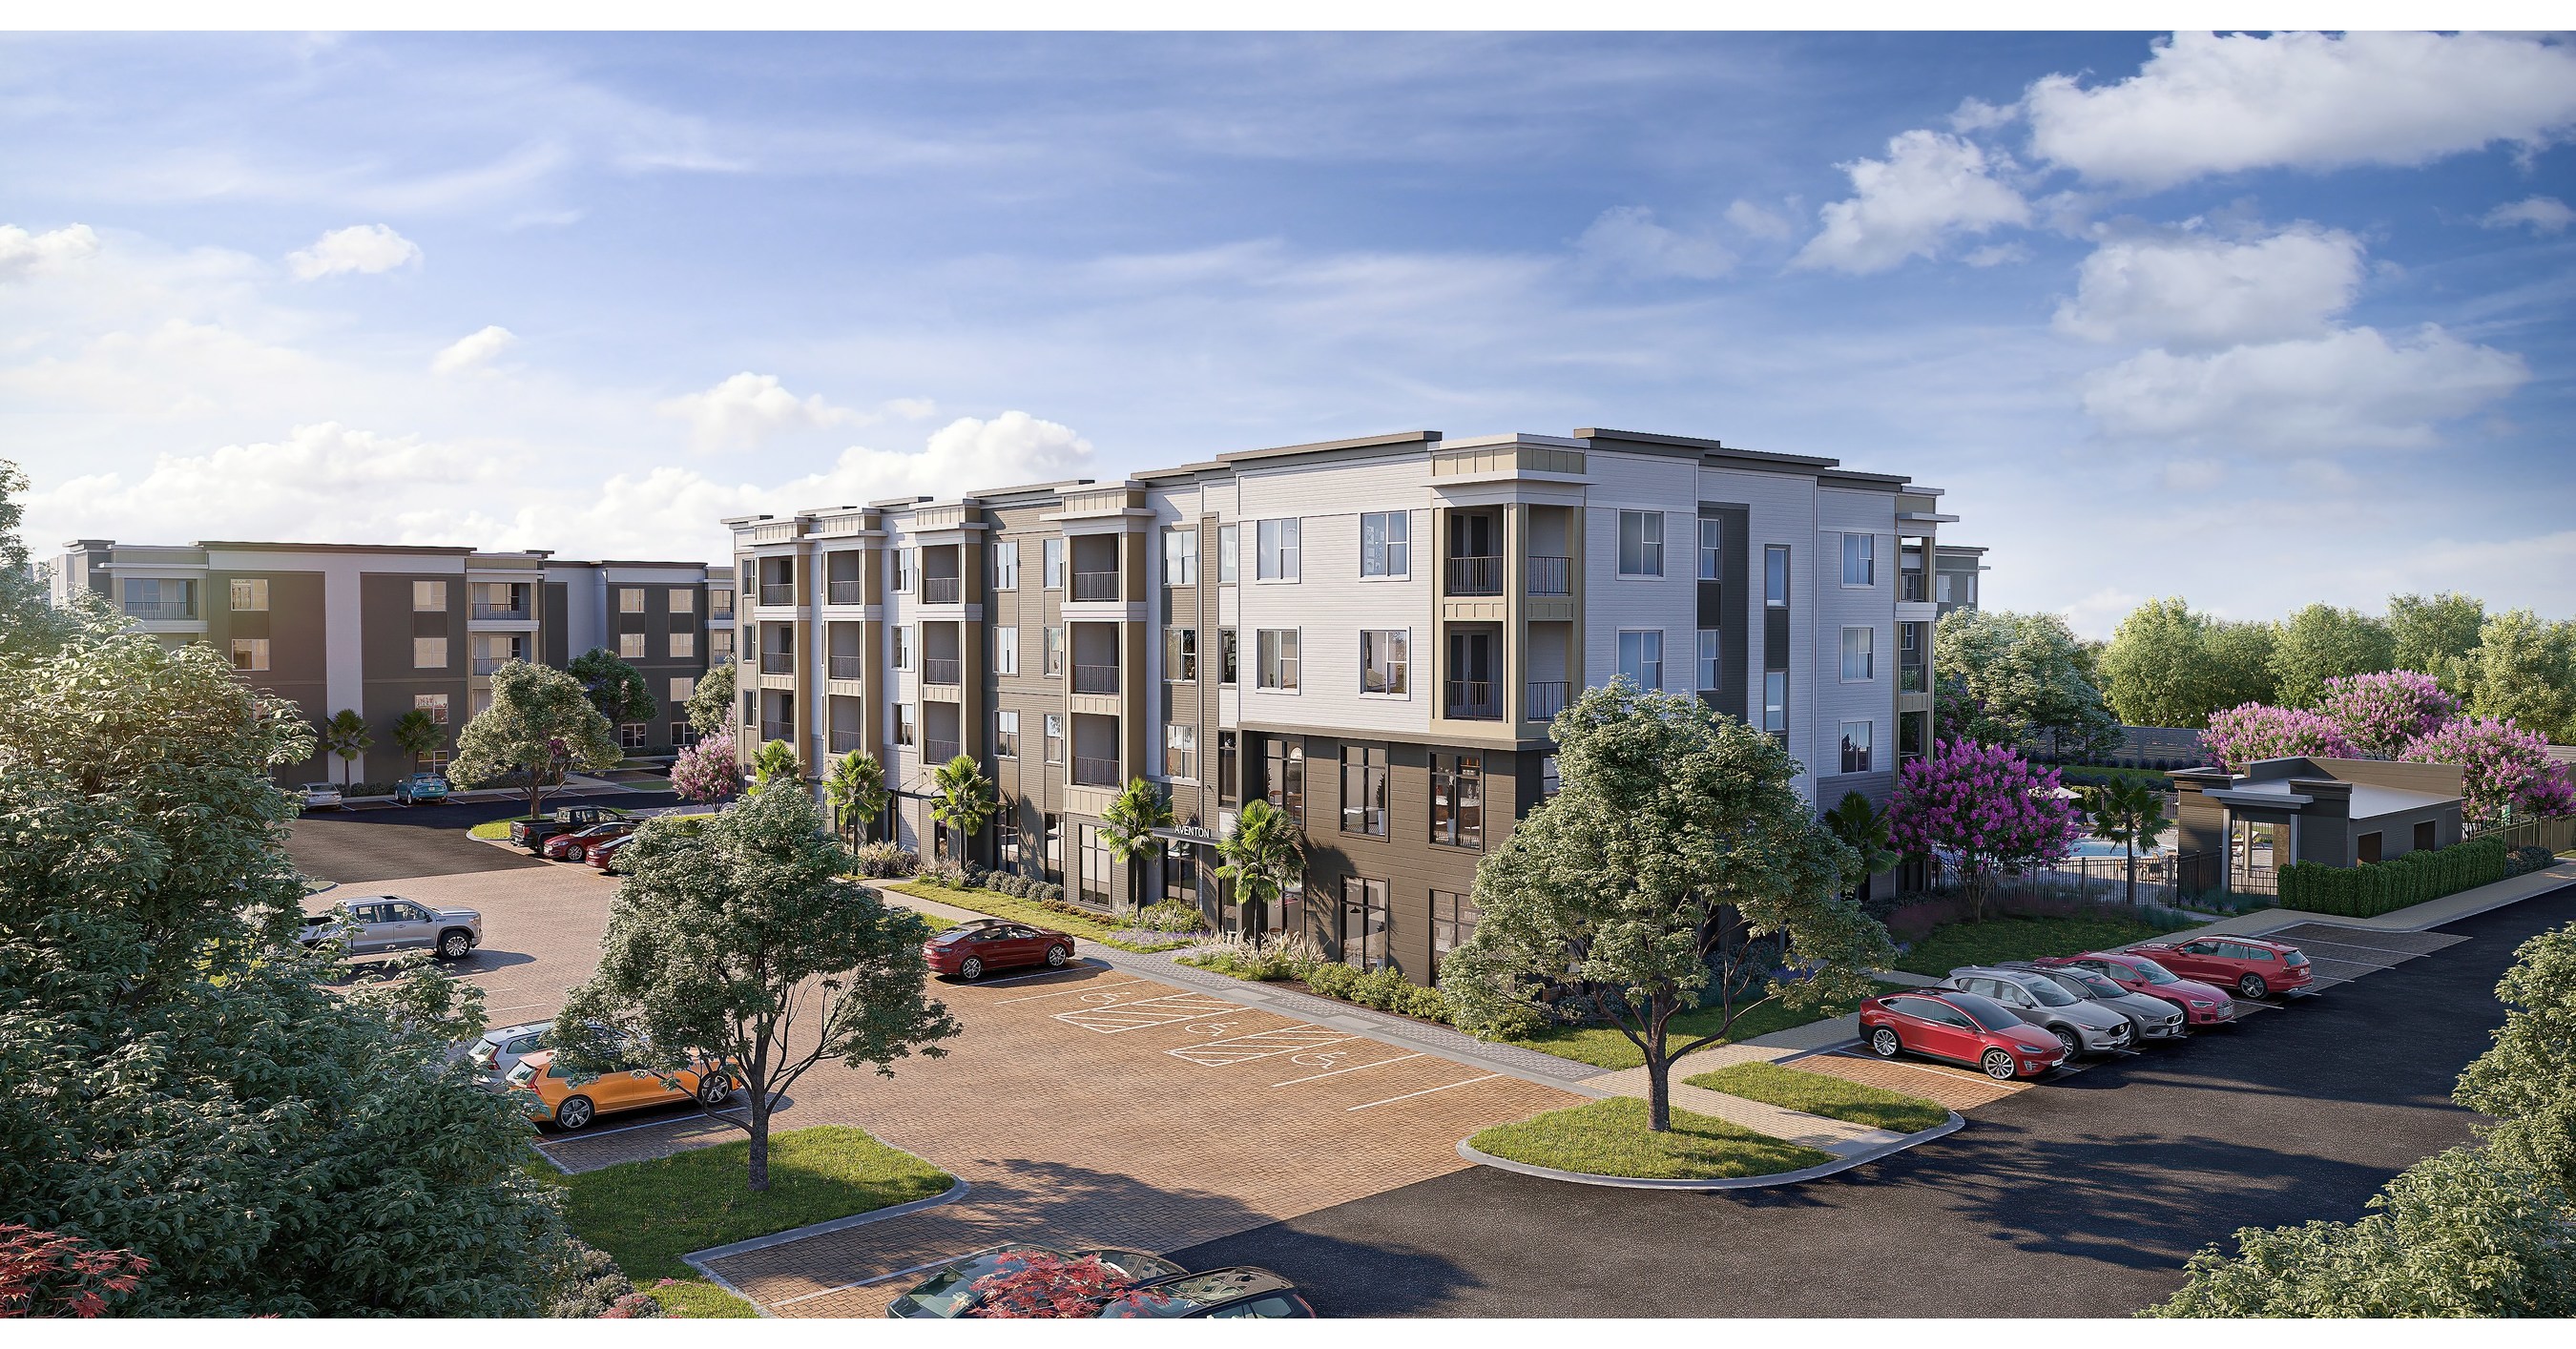 Aventon Companies Continues Expansion Across Georgia Markets with 280-Unit Luxury Apartment Development Project in Savannah